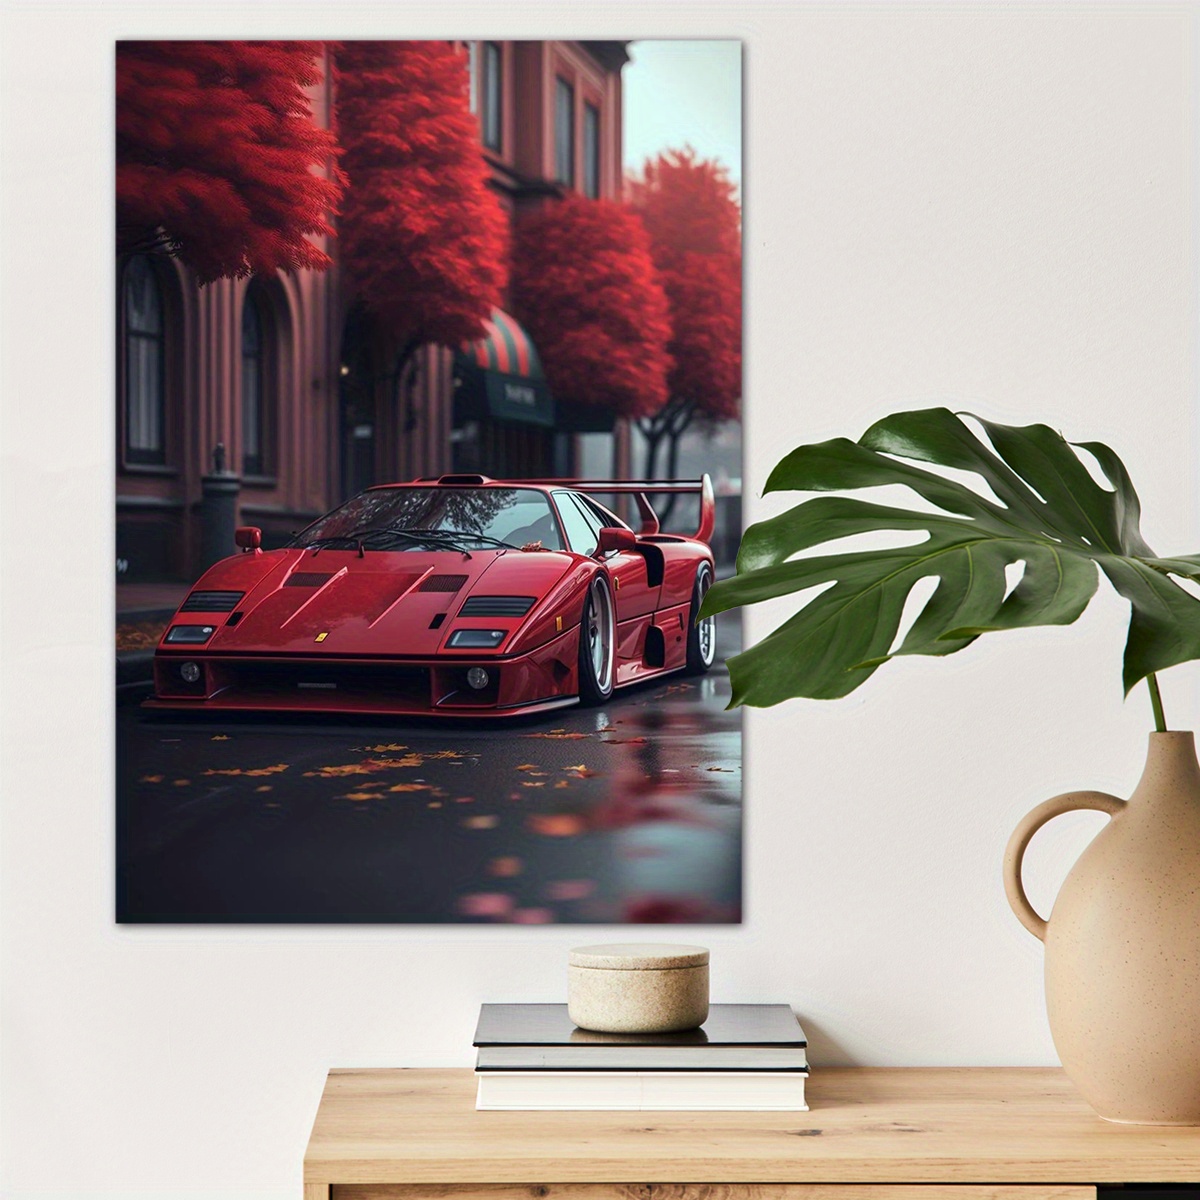 

1pc Red Super Car Poster Canvas Wall Art For Home Decor, Car Lovers Poster Wall Decor Roadster Canvas Prints For Living Room Bedroom Kitchen Office Cafe Decor, Perfect Gift And Decoration